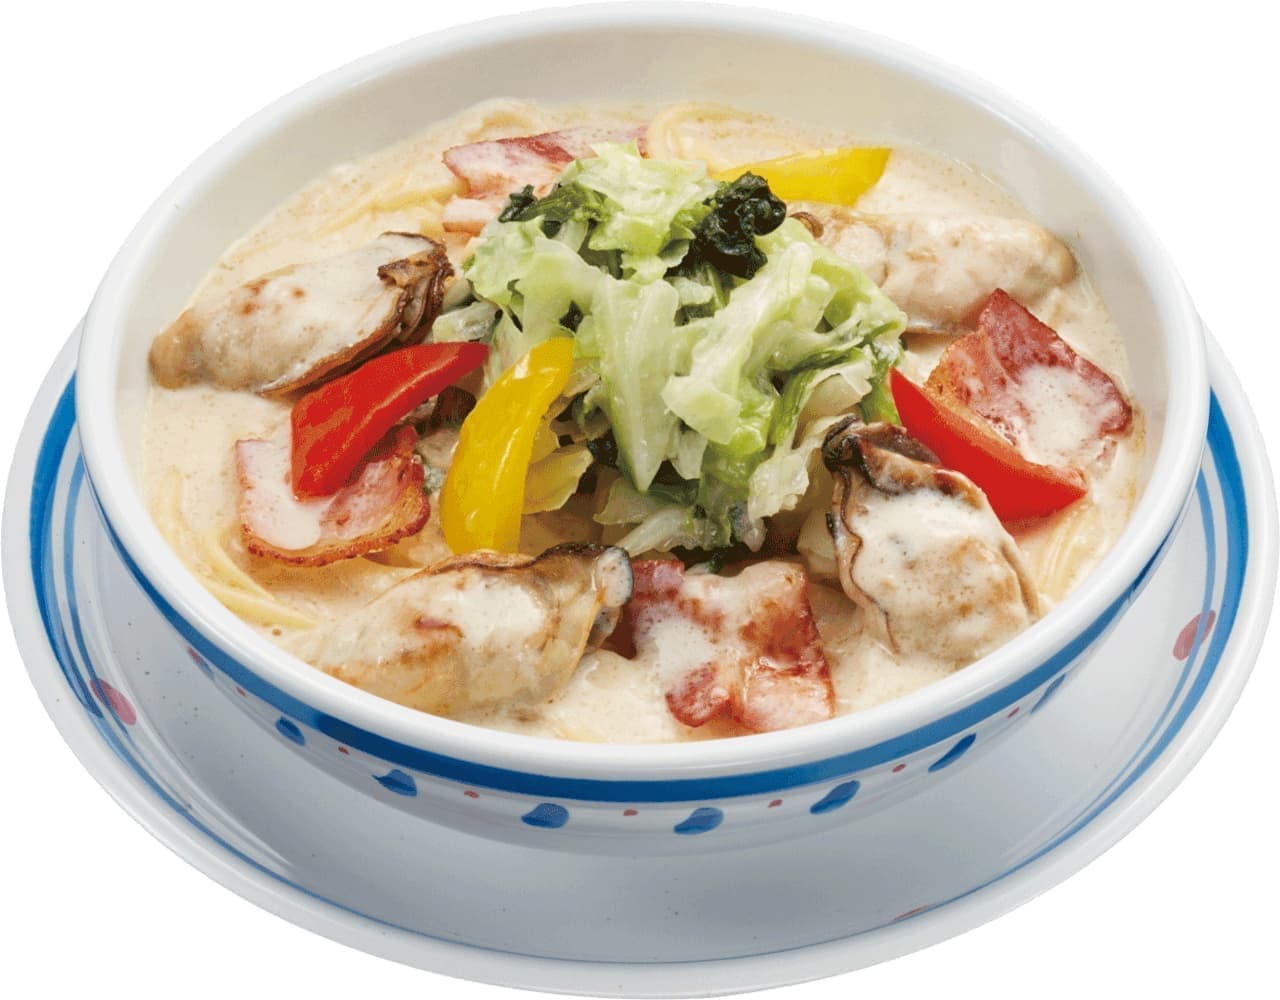 Jolly Pasta "Harimanada Oysters, Bacon and Vegetables in Cream Soup Pasta